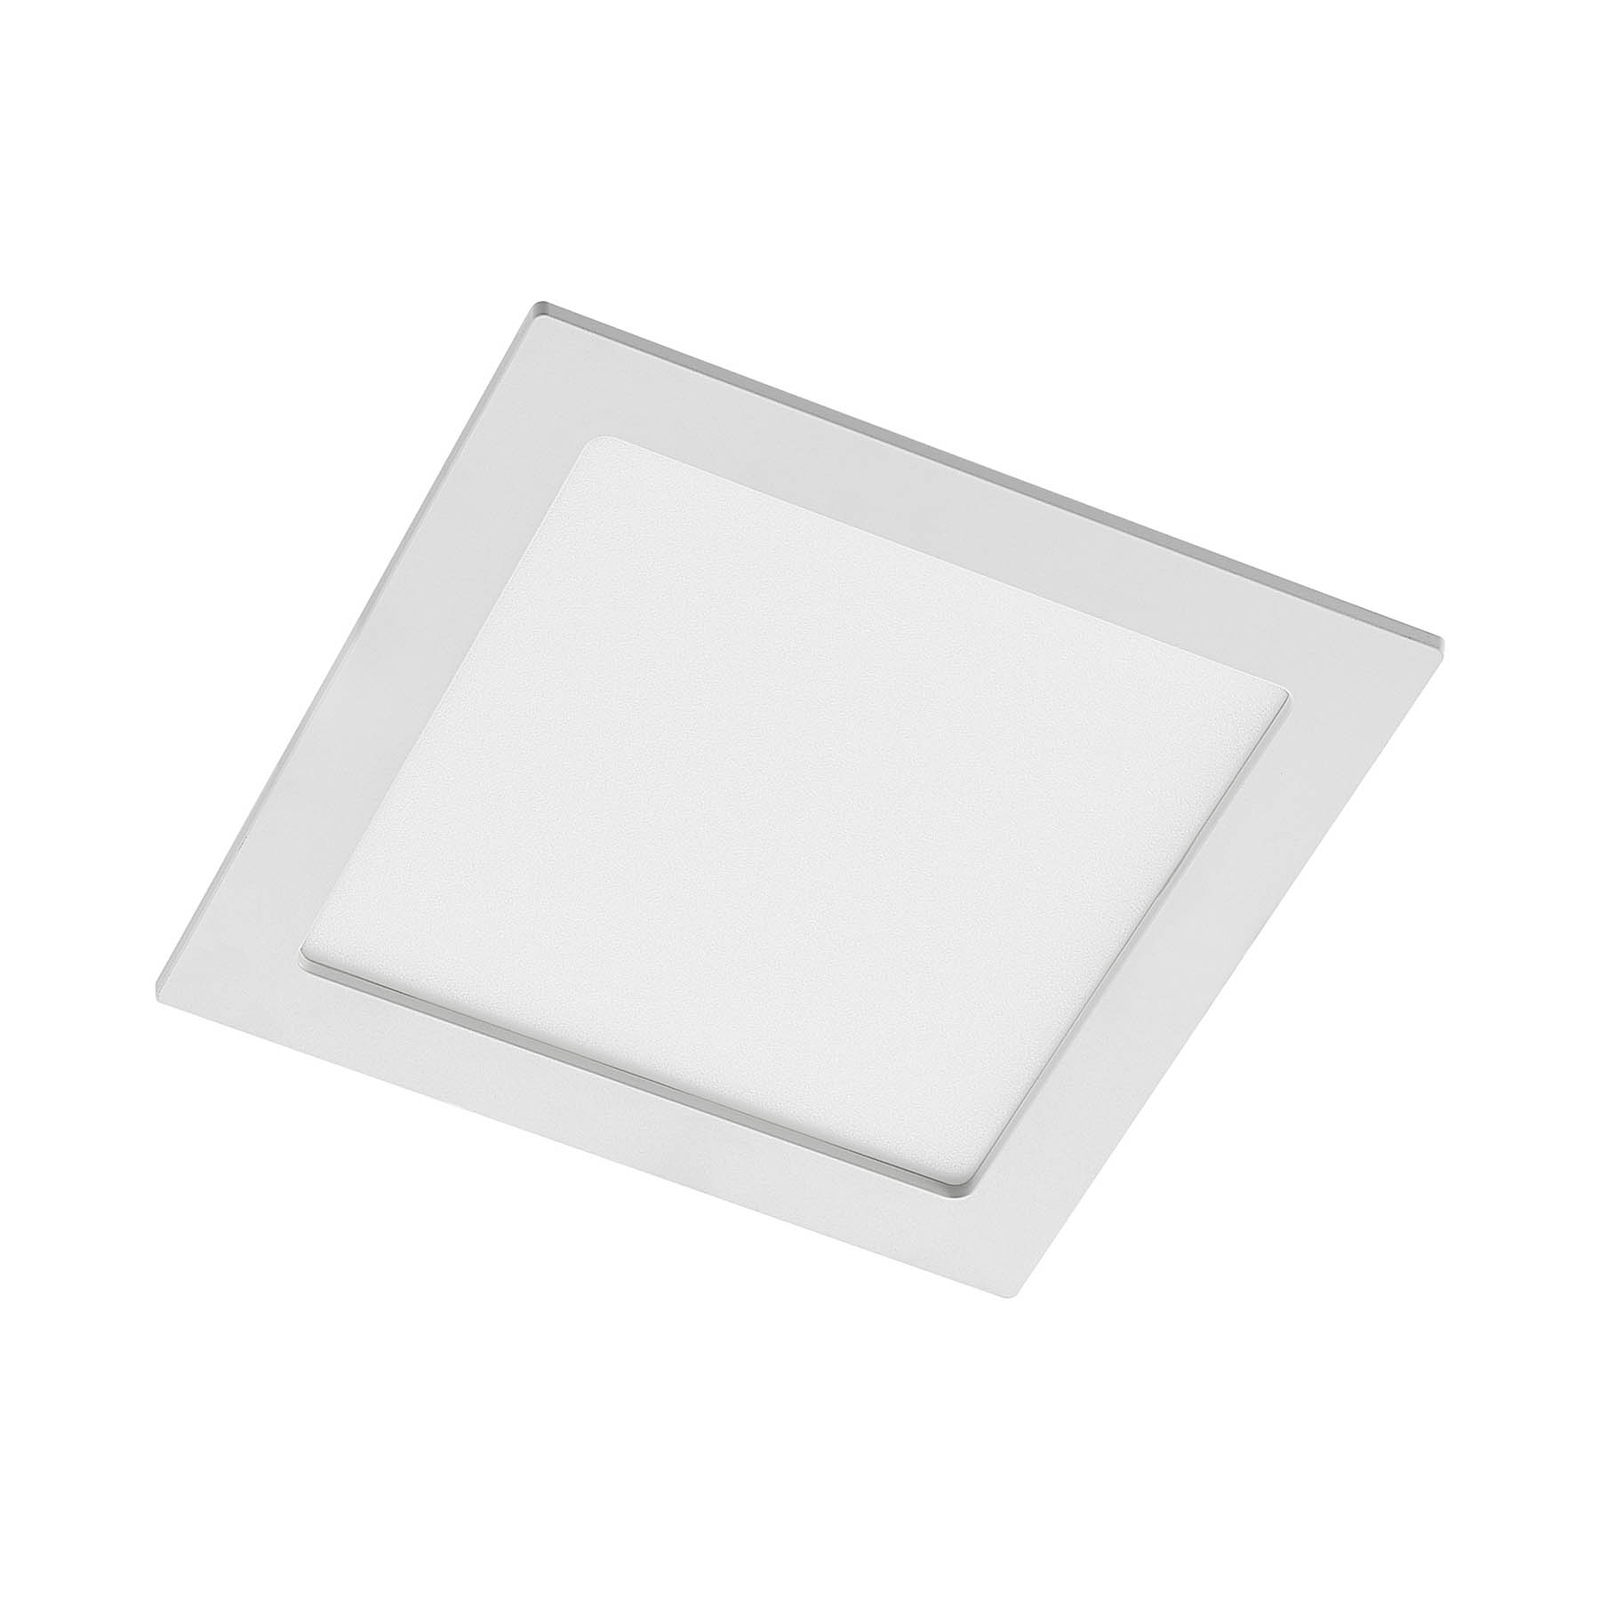 Prios LED recessed light Helina, white, 22 cm, 18 W, dimmable